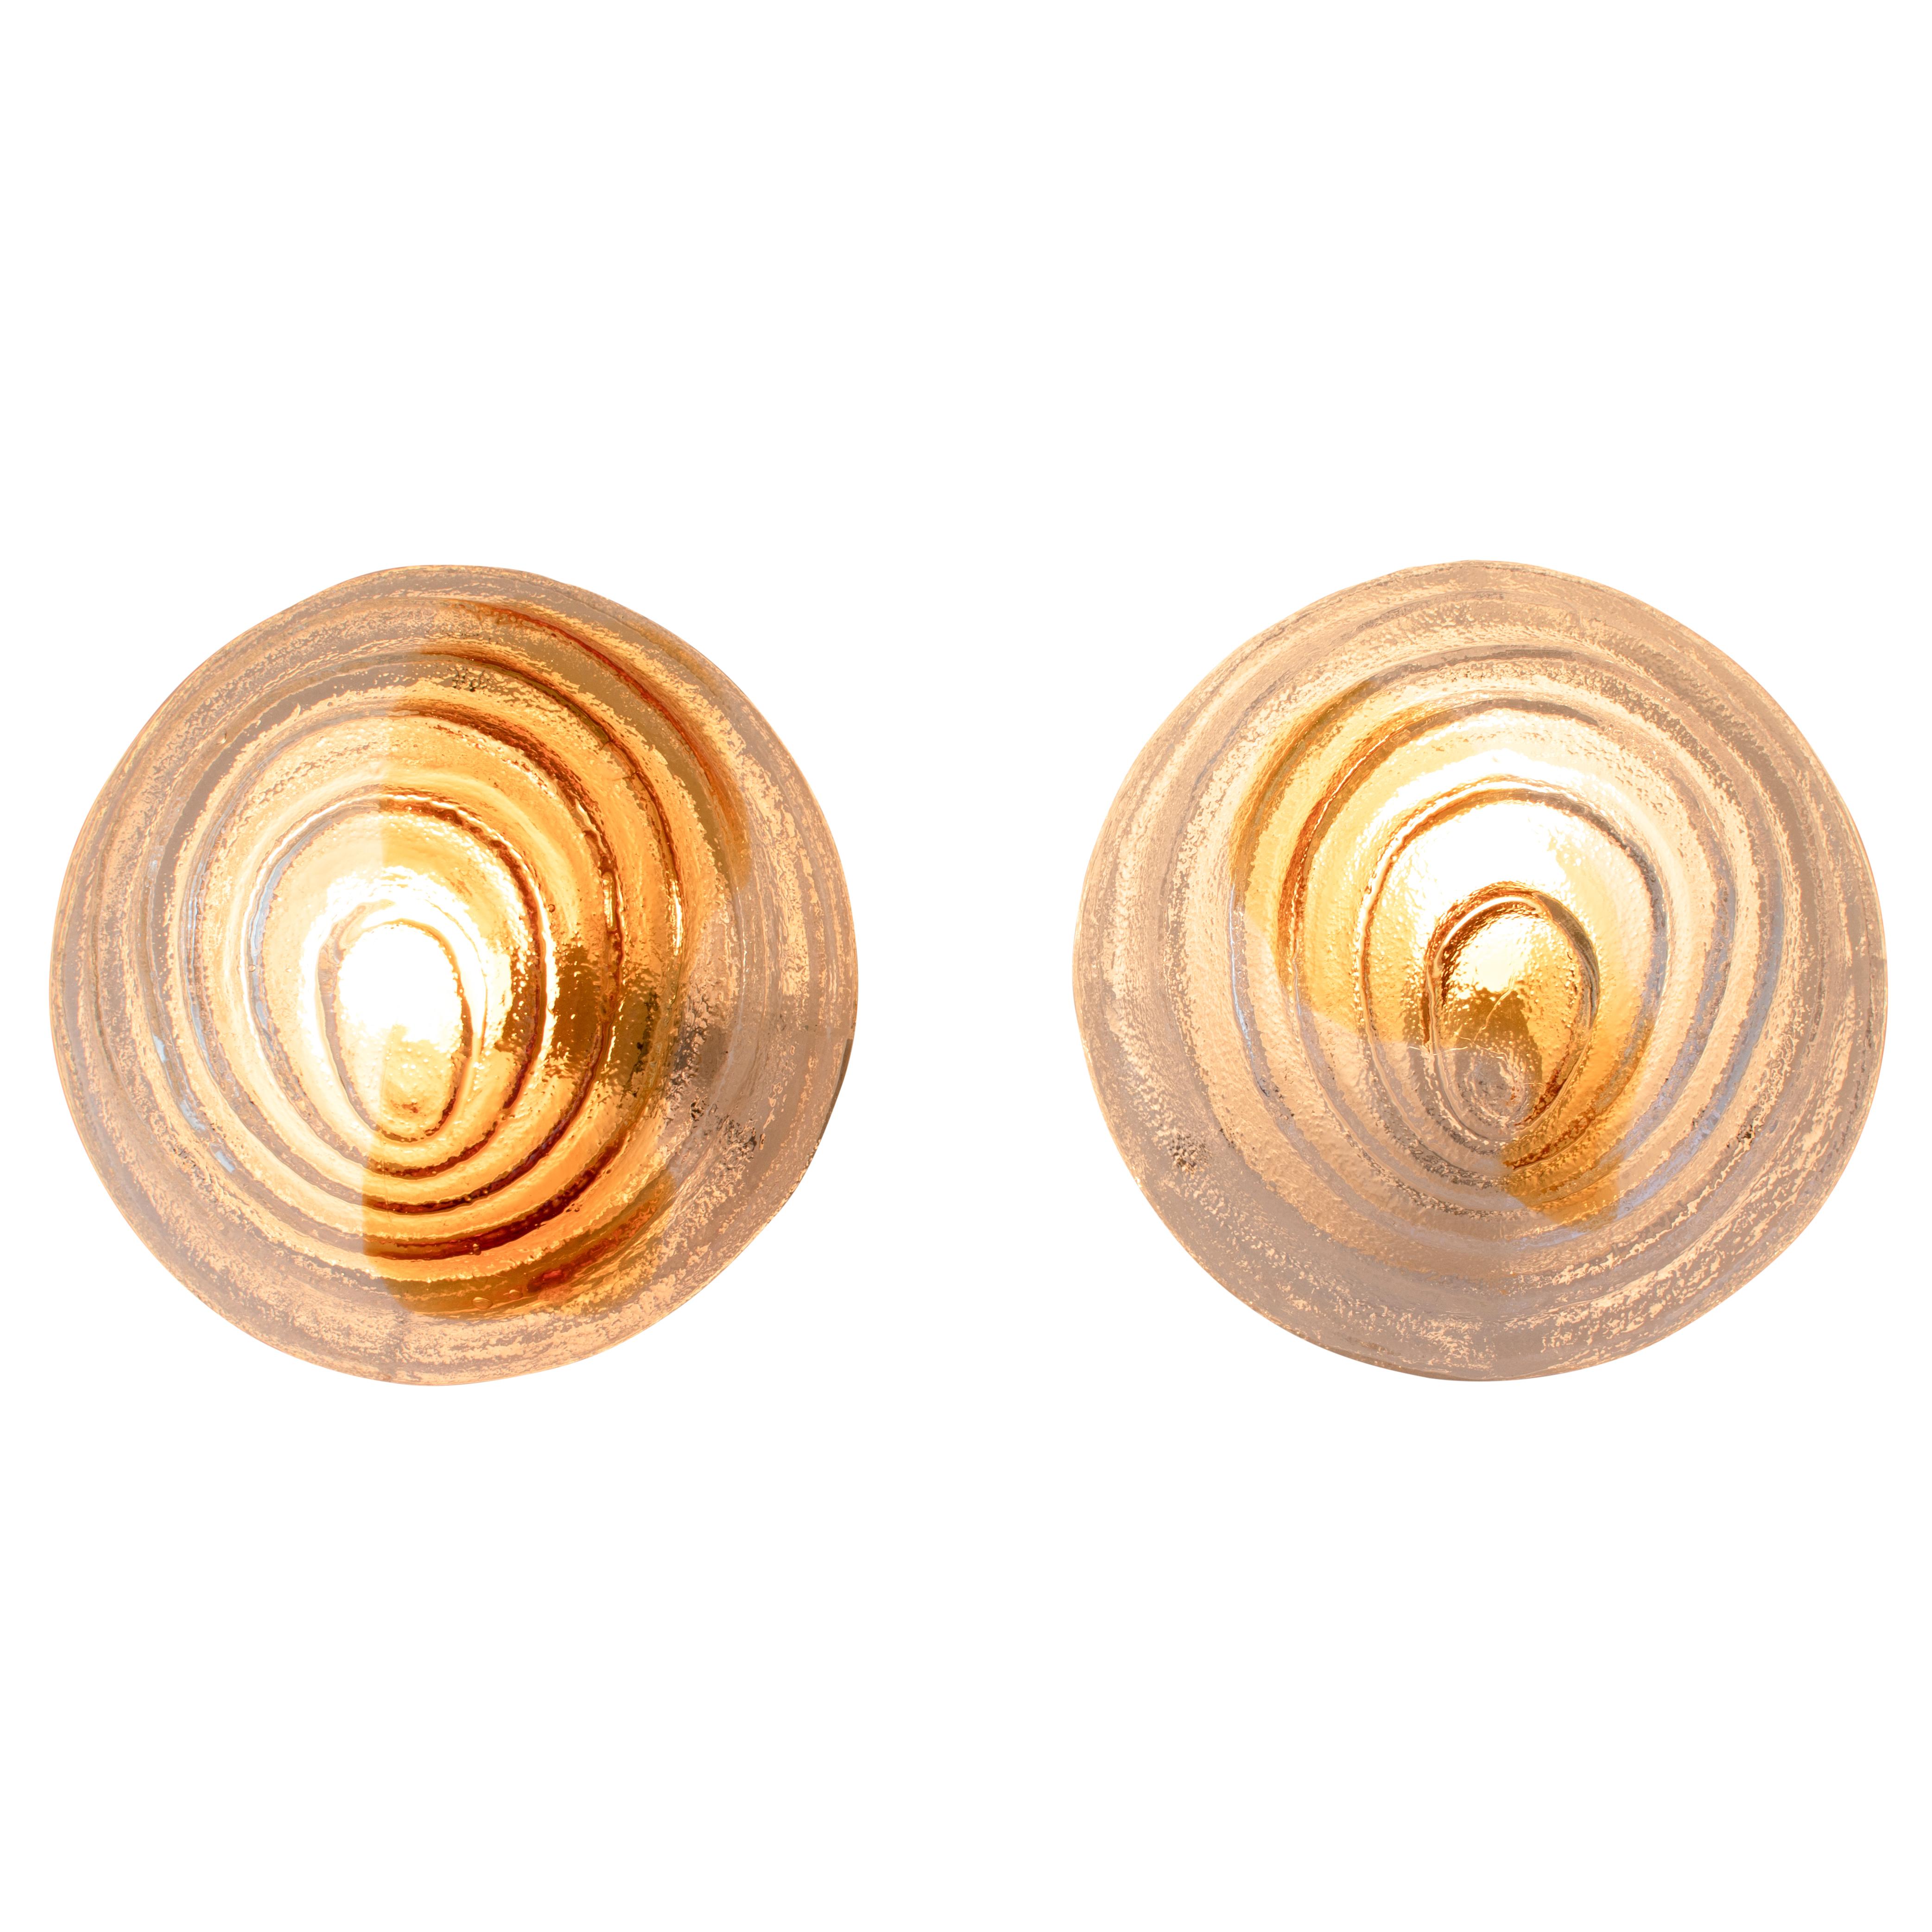 Murano glass sconces feature circular clear glass globes with amber inclusions cast in a highly sculptural swirl design with great depth and texture. Each glass globe attaches with three set screws to a white-painted metal base that holds a single